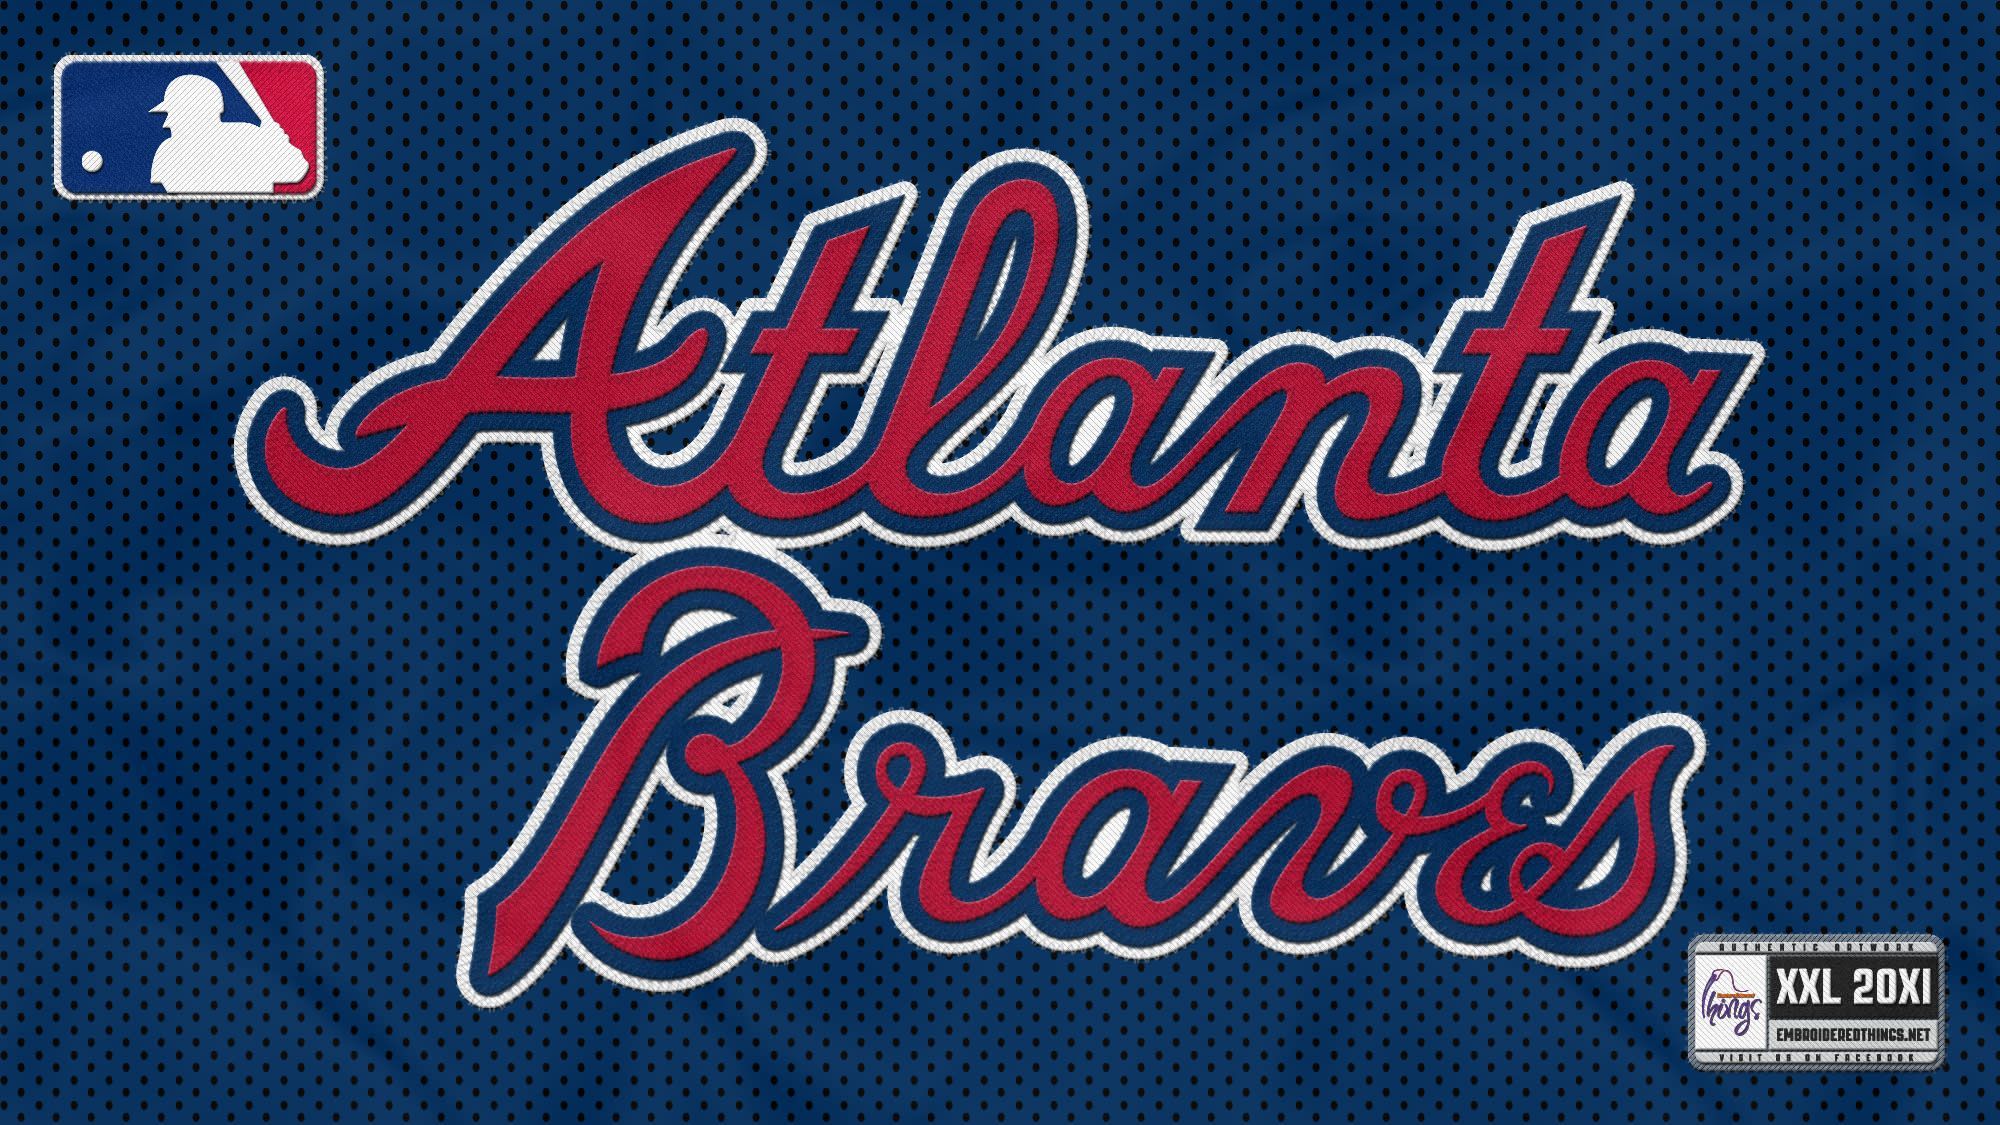 braves wallpapers | WallpaperUP